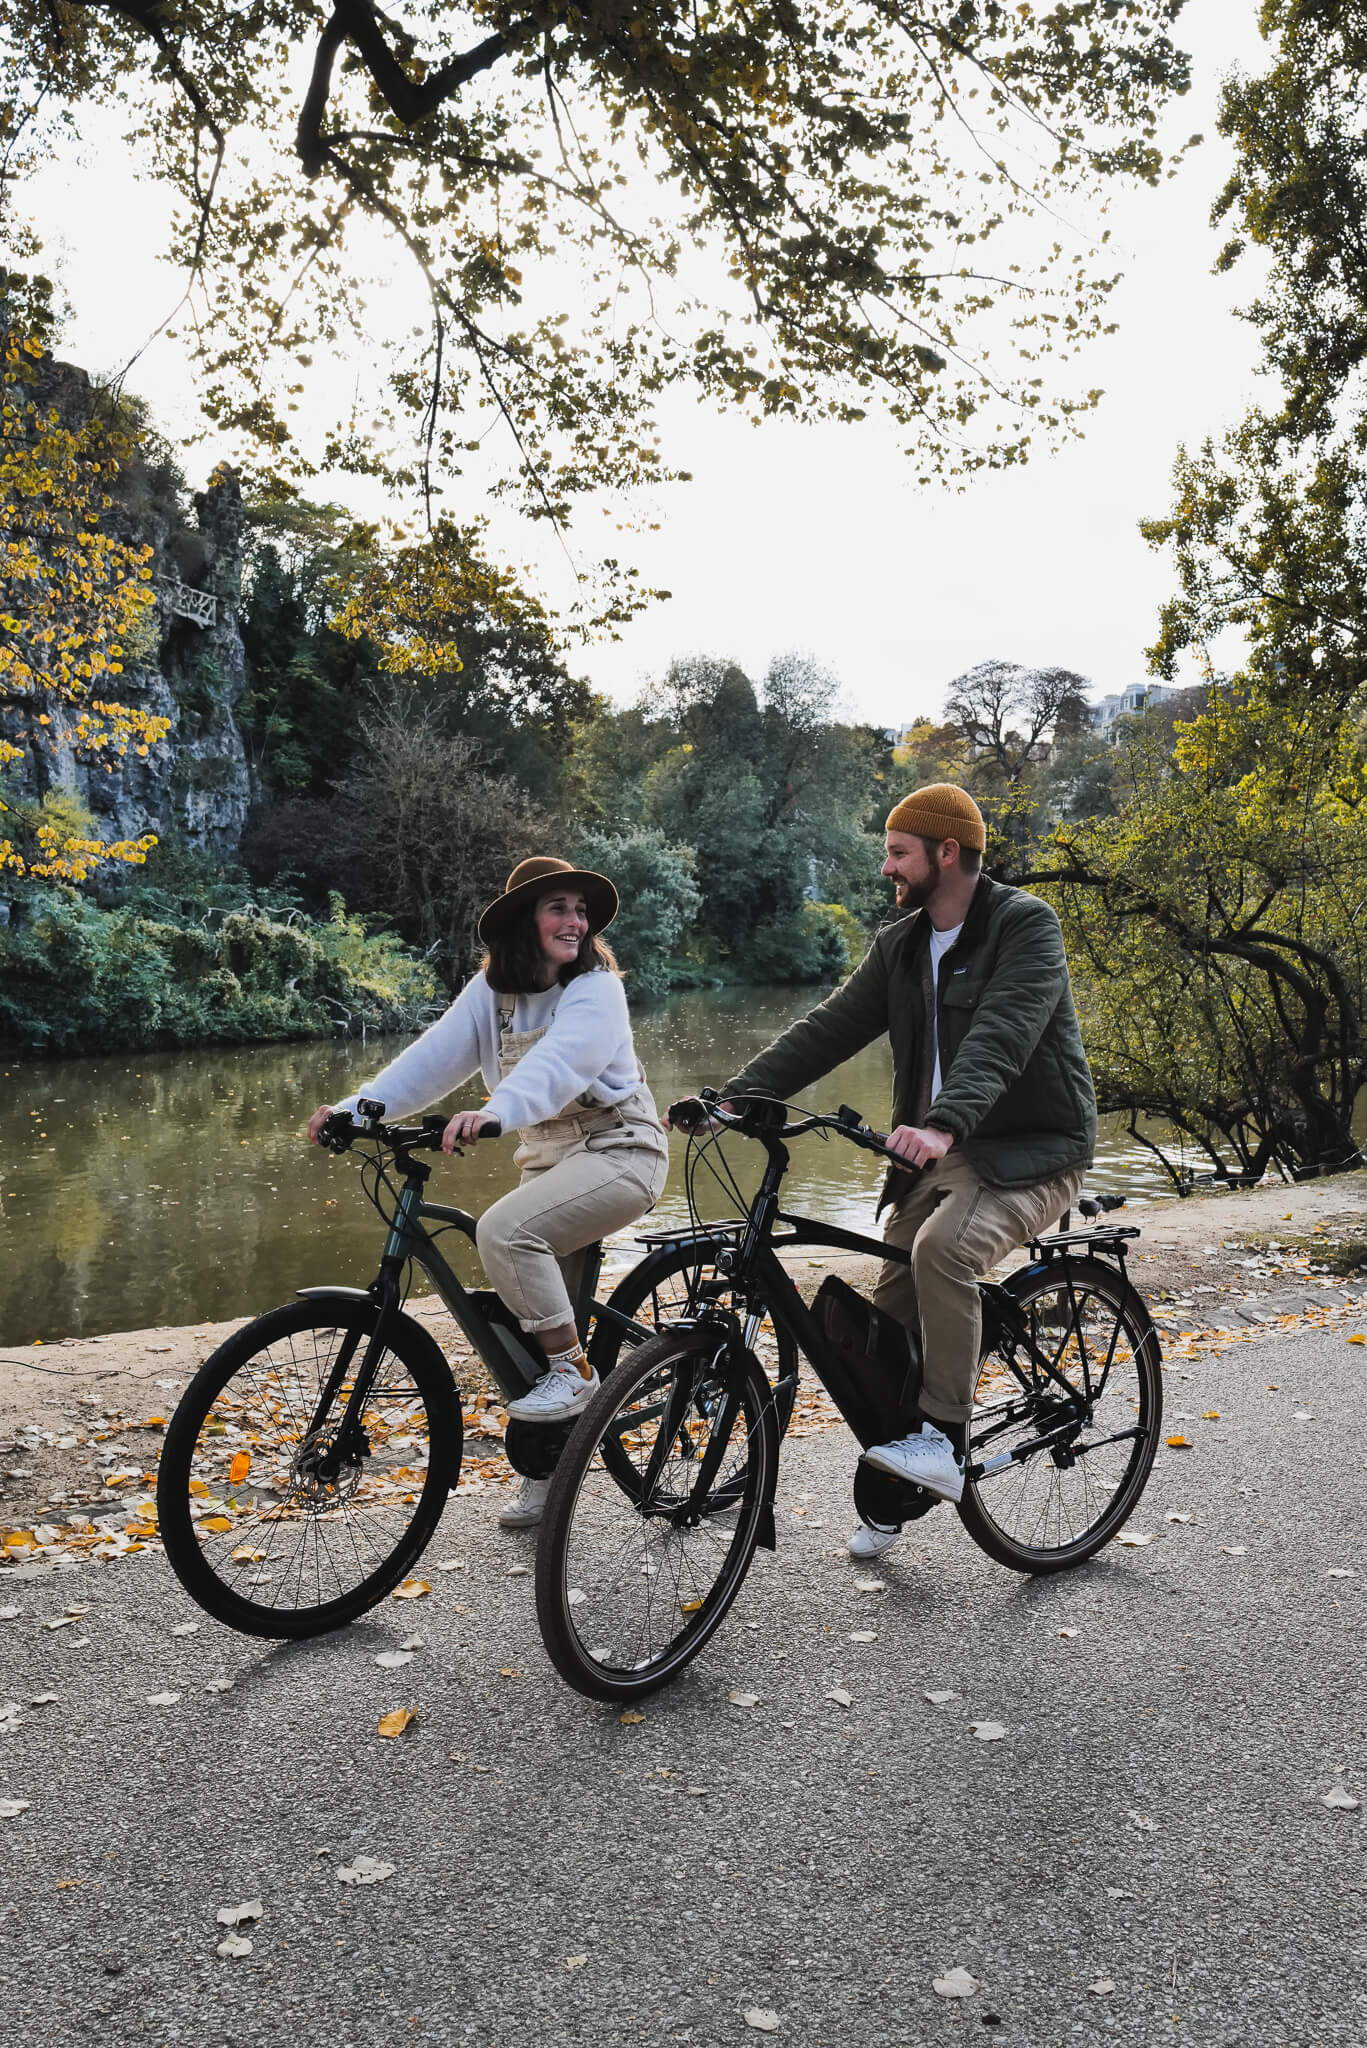 Couple during a ride on an electric bike.